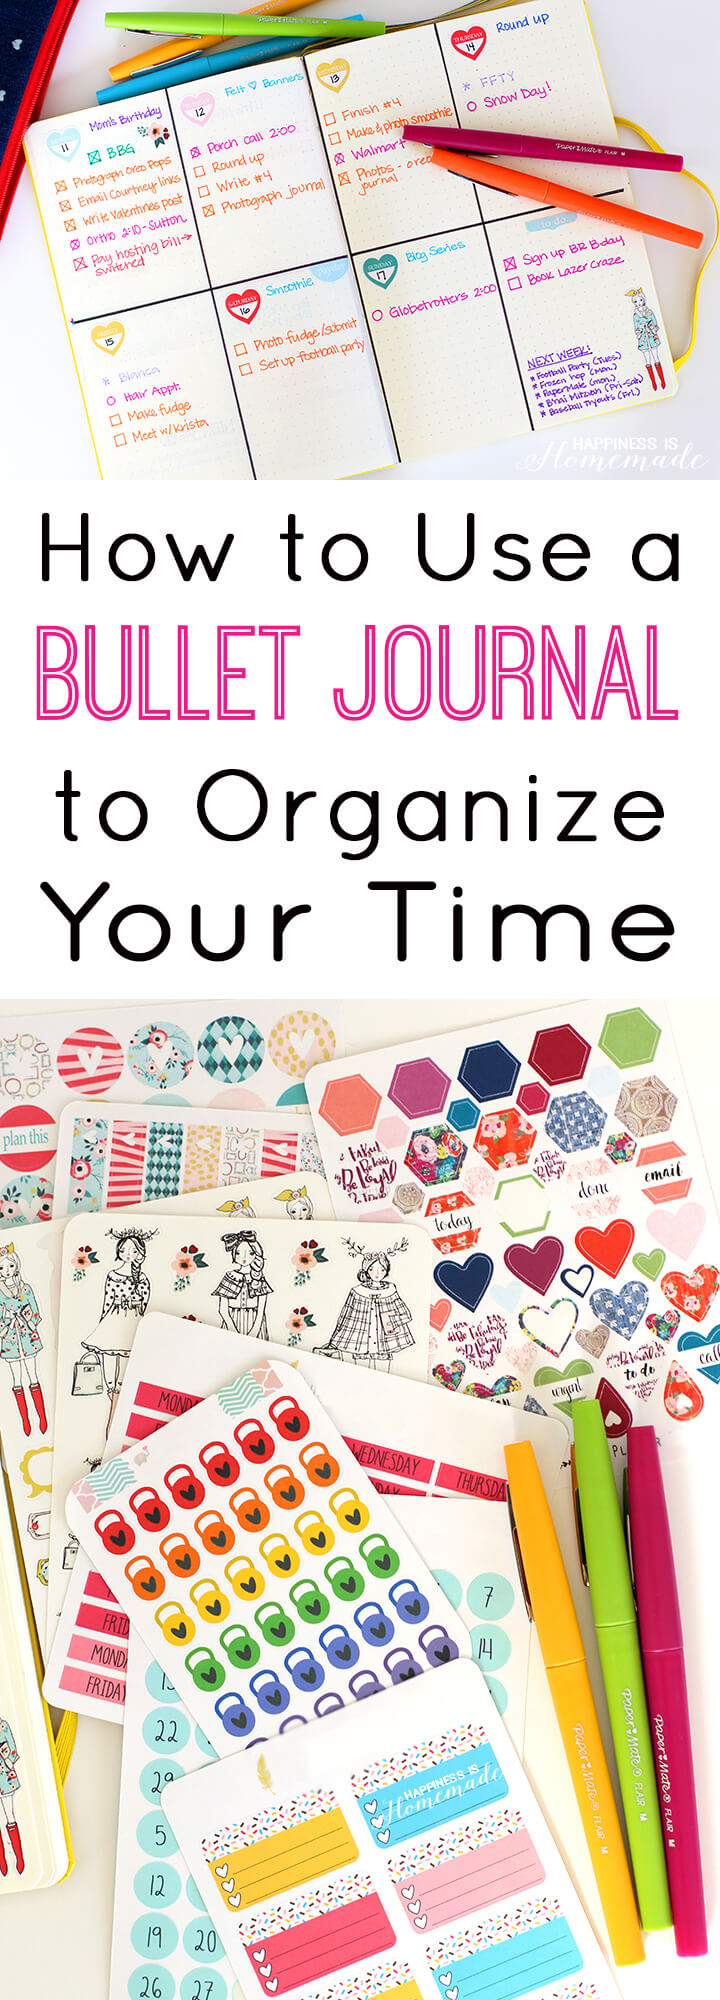 https://www.happinessishomemade.net/wp-content/uploads/2016/01/How-to-Use-a-Bullet-Journal-to-Organize-Your-Time.jpg